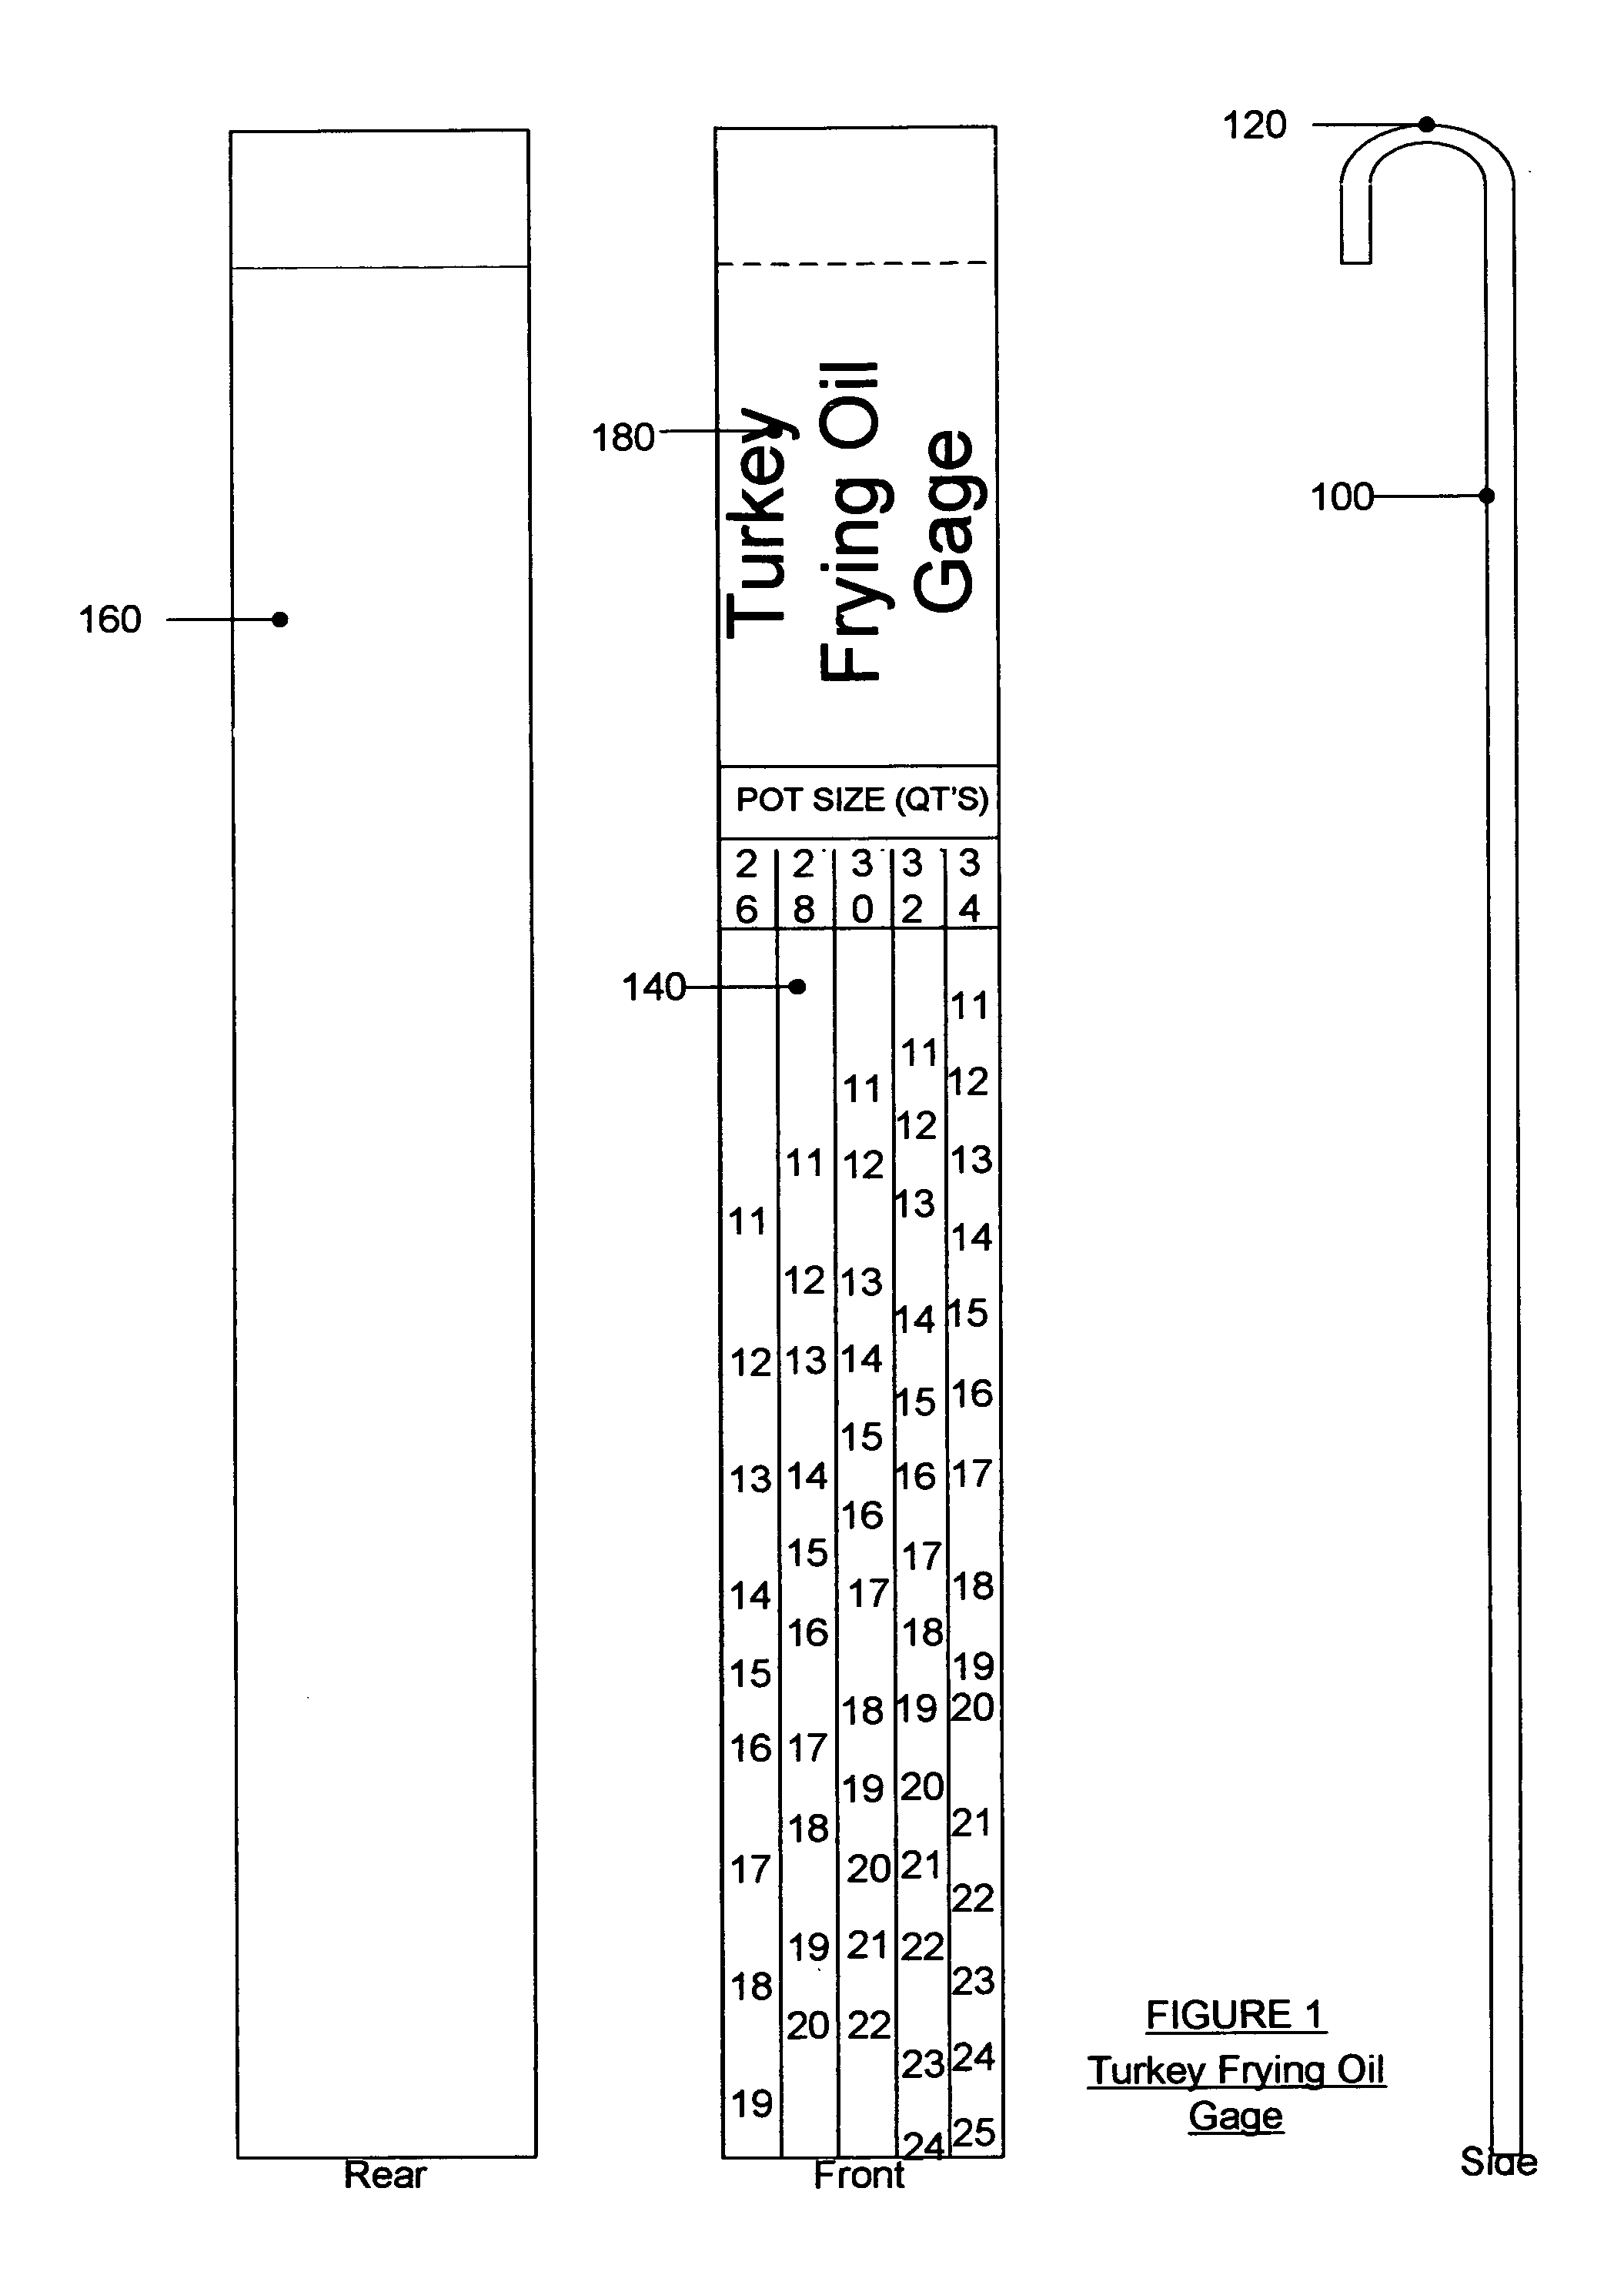 Apparatus and method for properly pre-measuring turkey frying oil